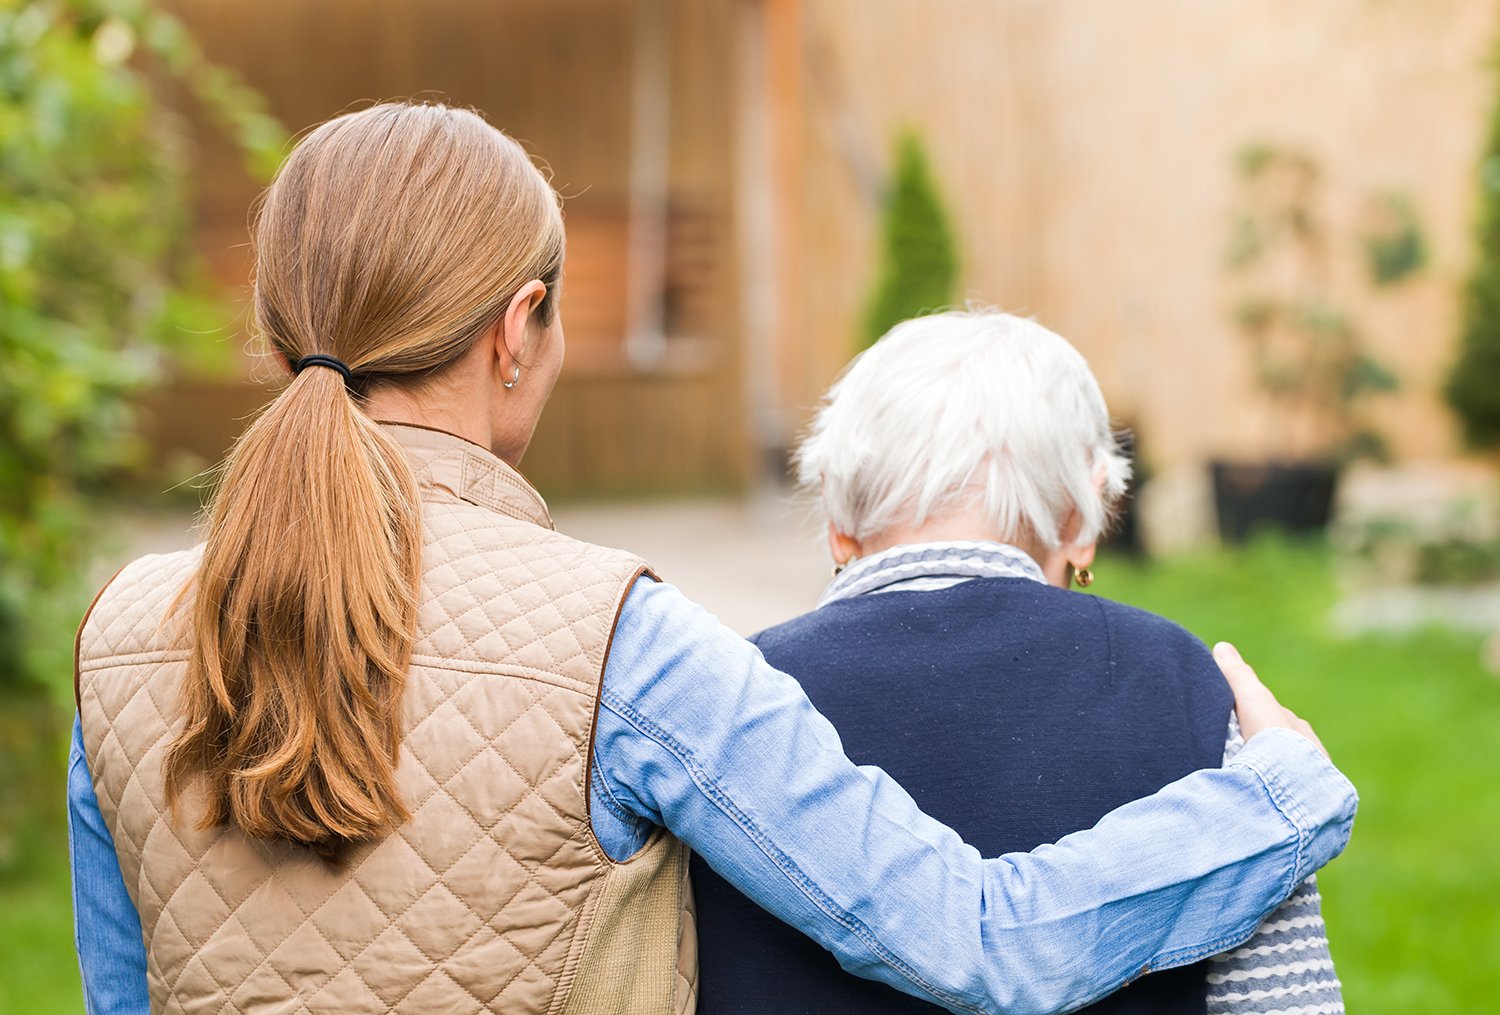 young woman walking away with arm around elderly woman's shoulders